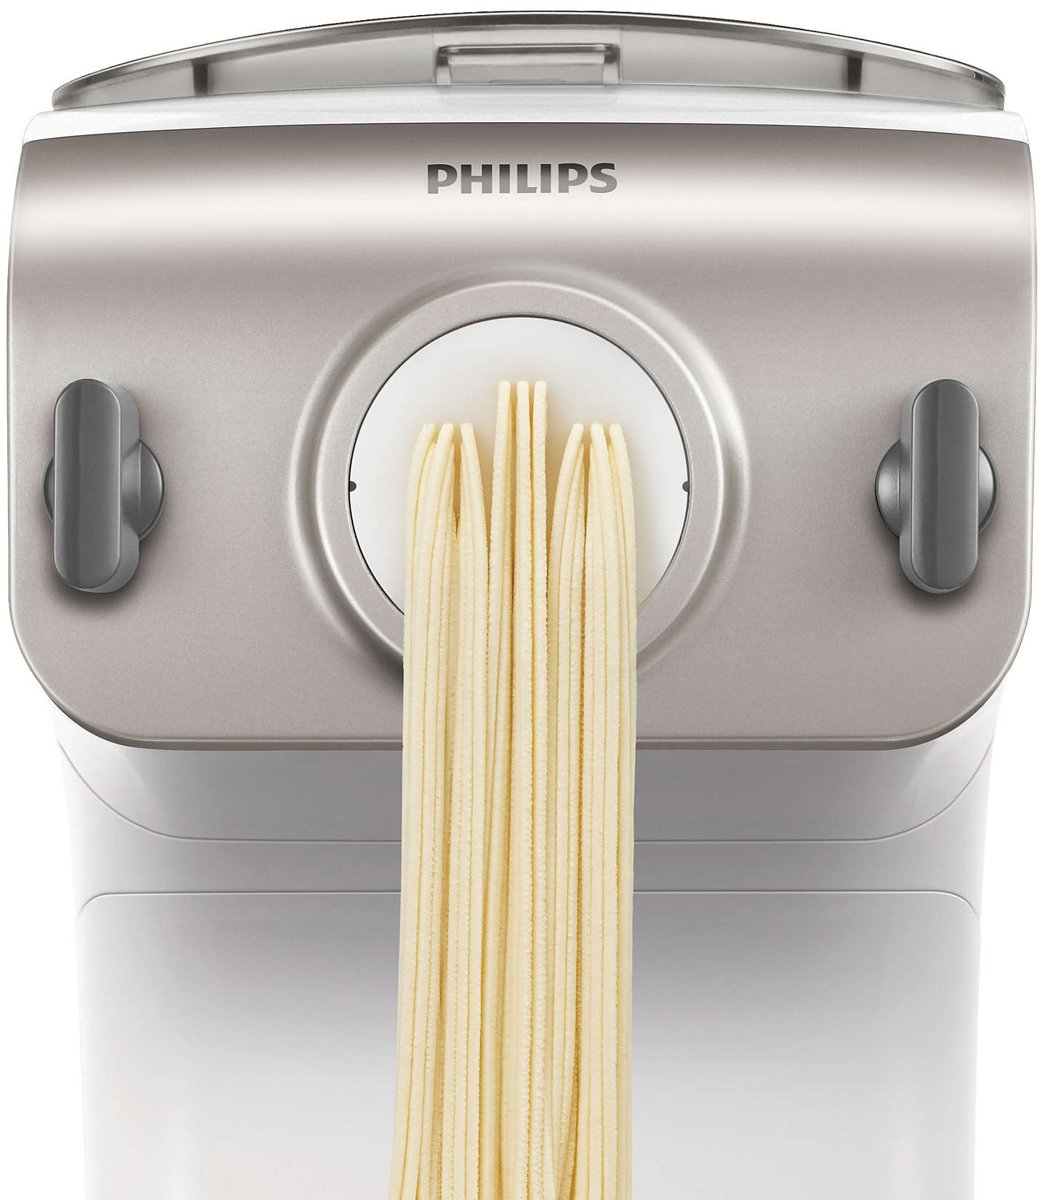 pasta and noodle maker